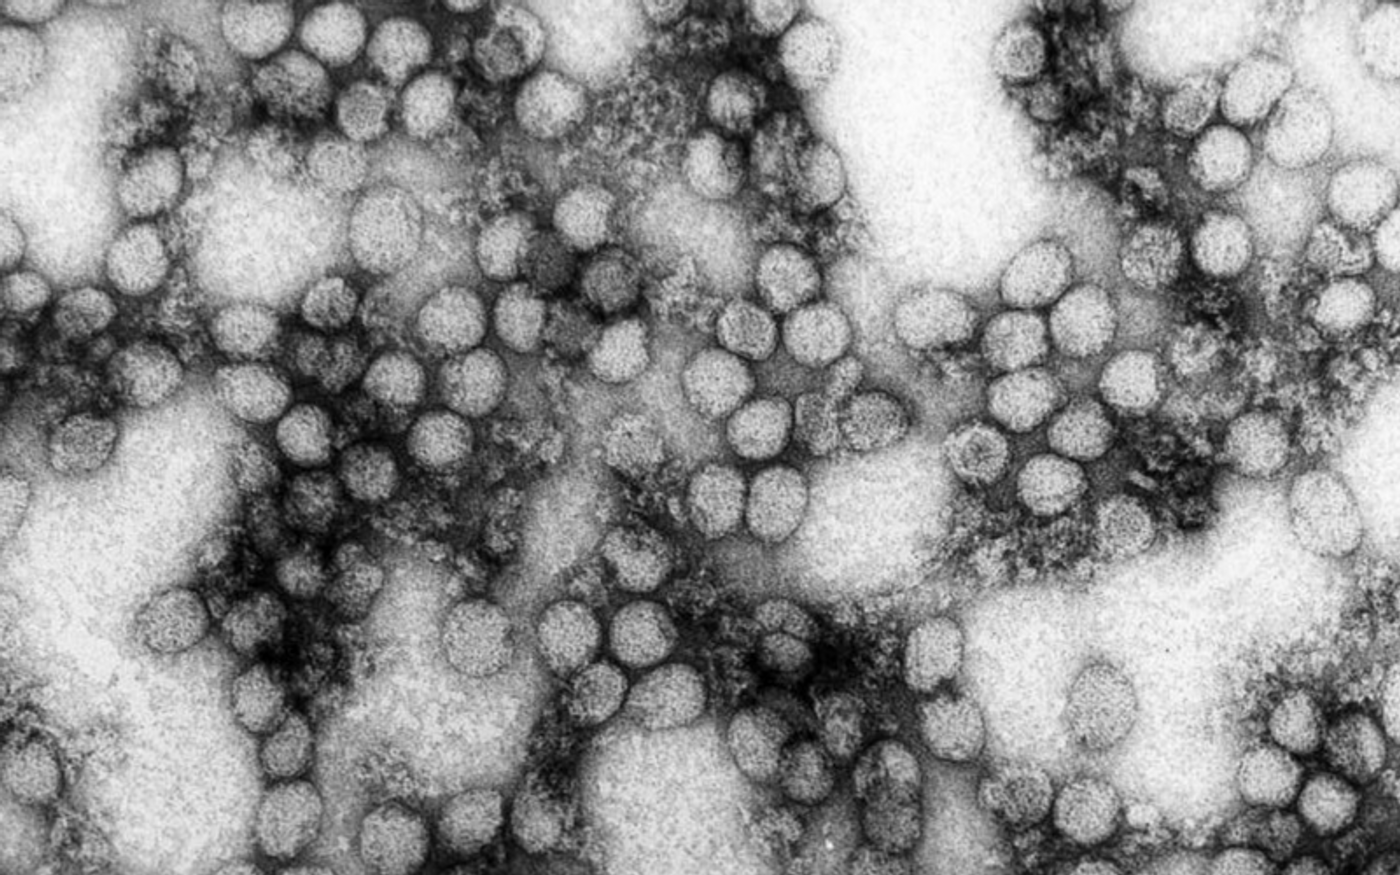 The yellow fever virus. Credit: CDC Public Health Image Library